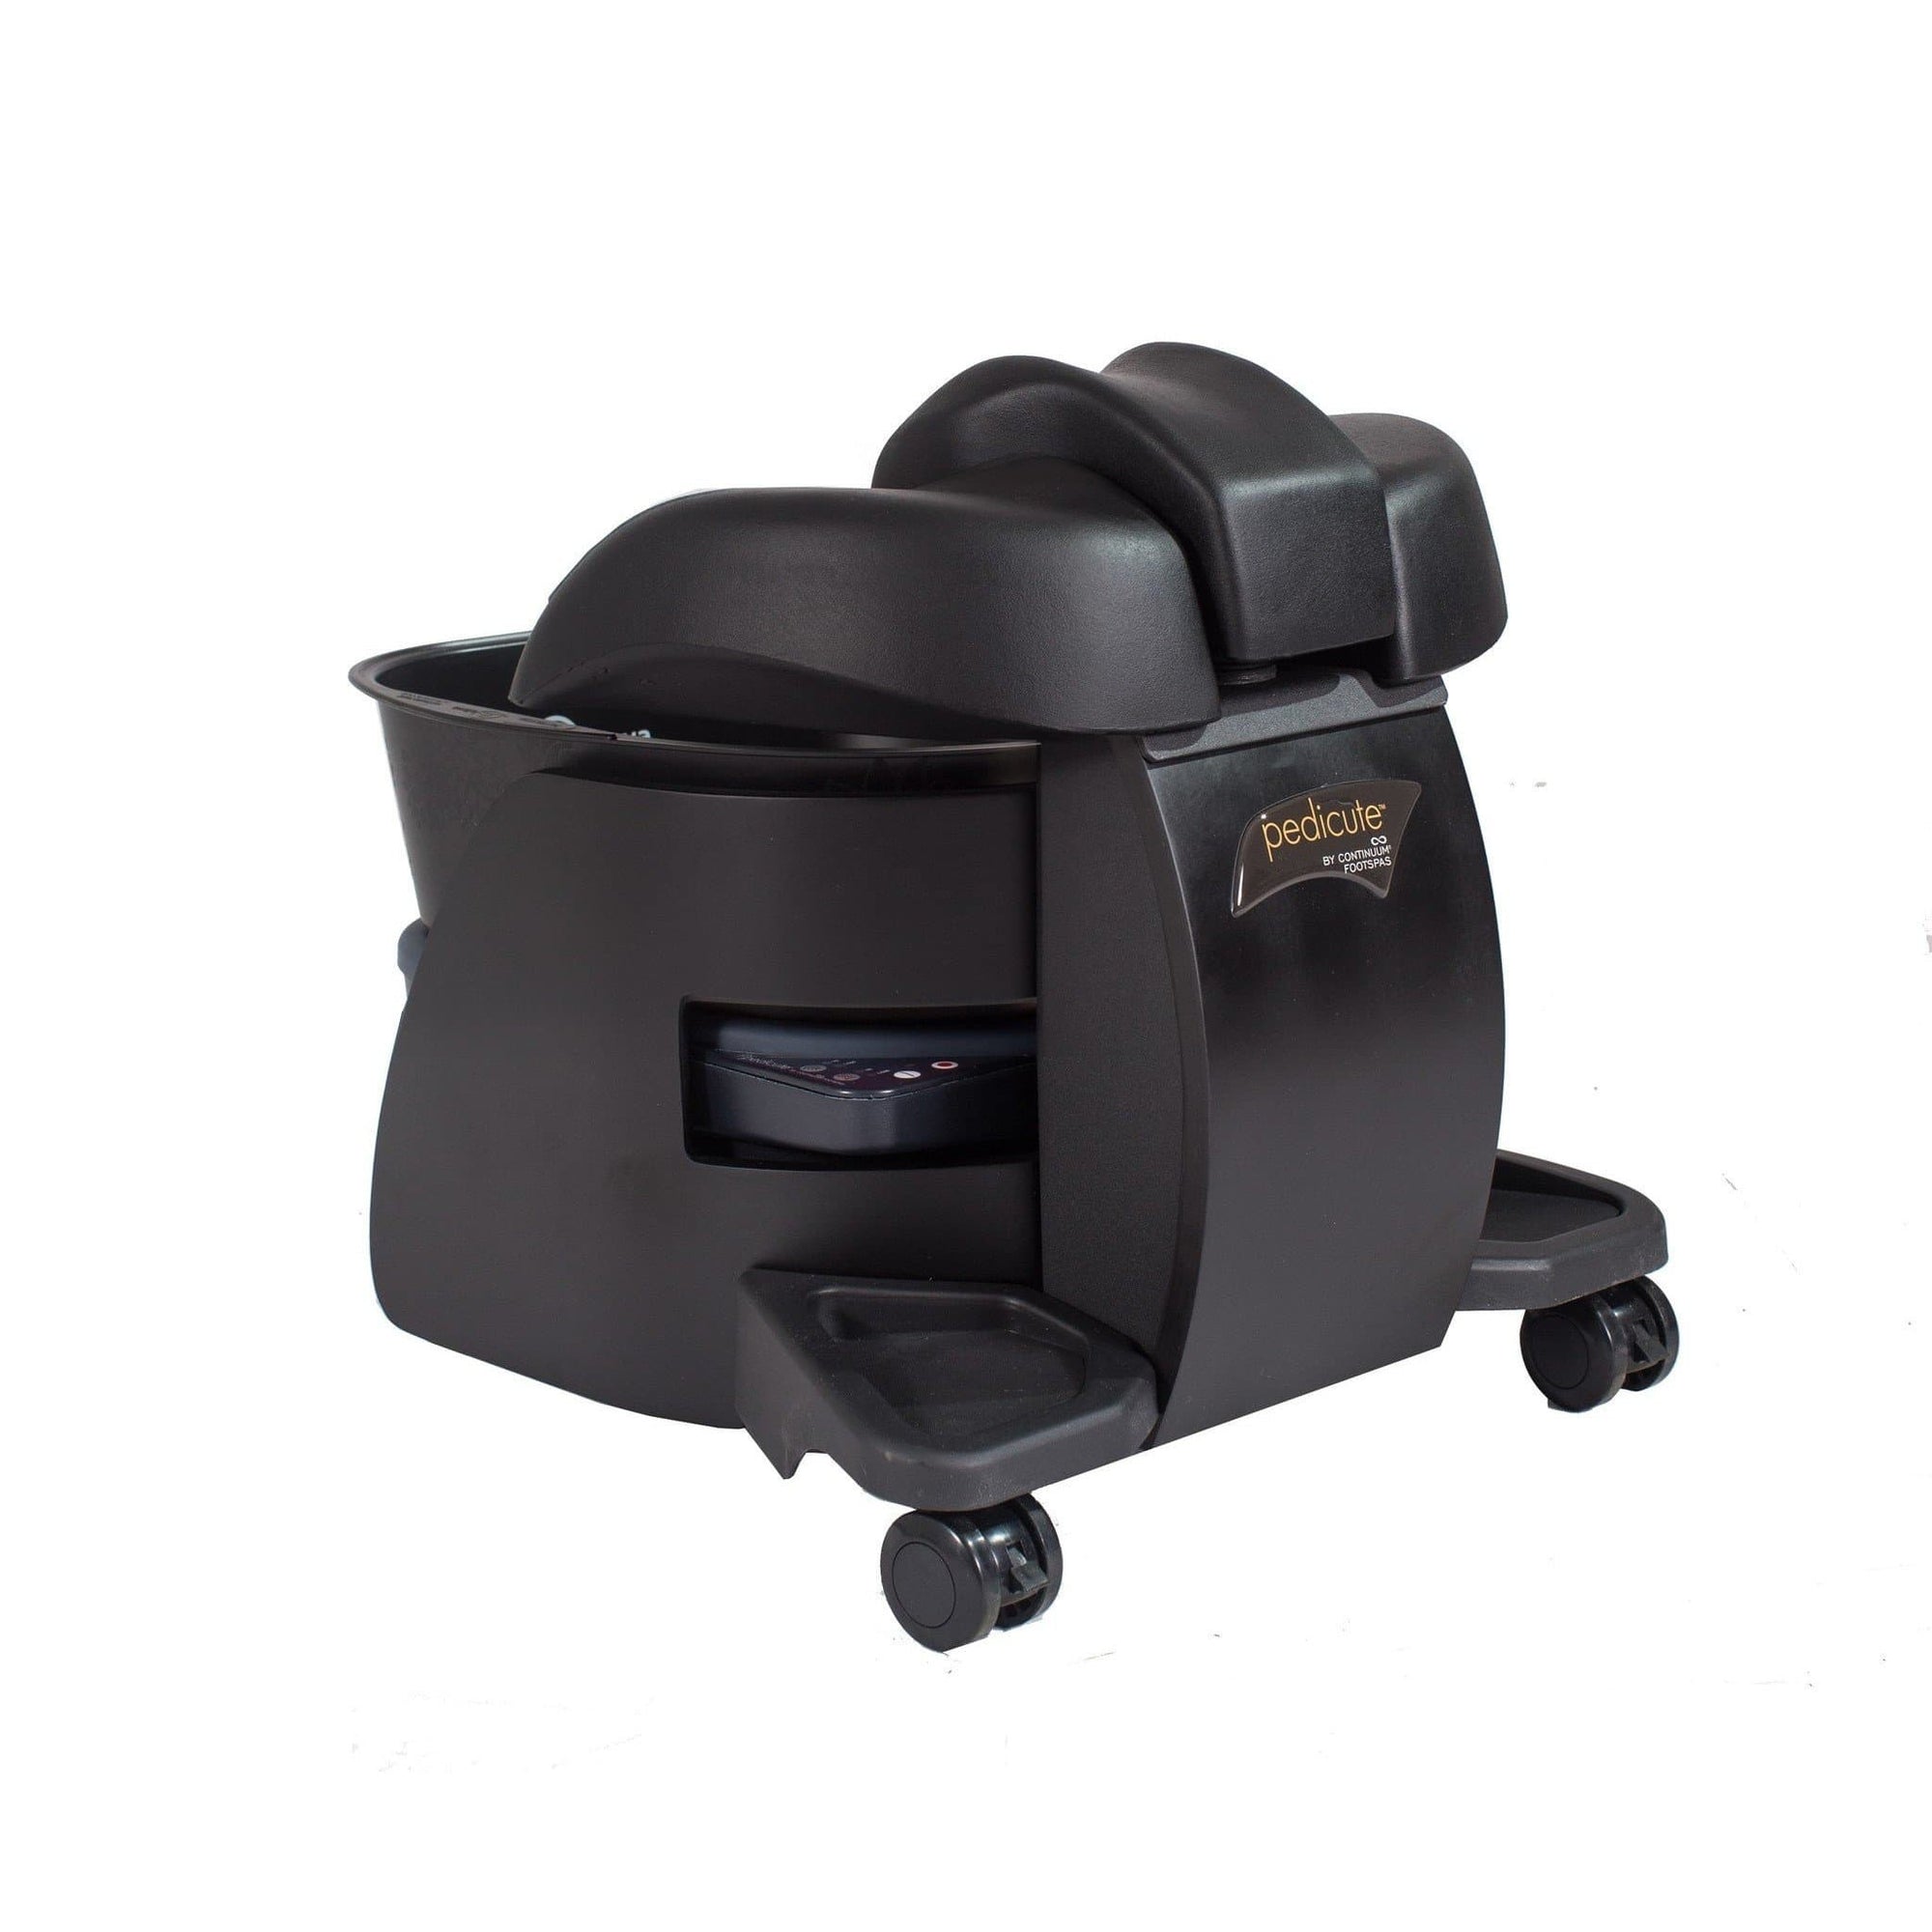 Continuum Continuum Pedicute Standard Portable Spa Package Pedicure & Spa Chairs - ChairsThatGive